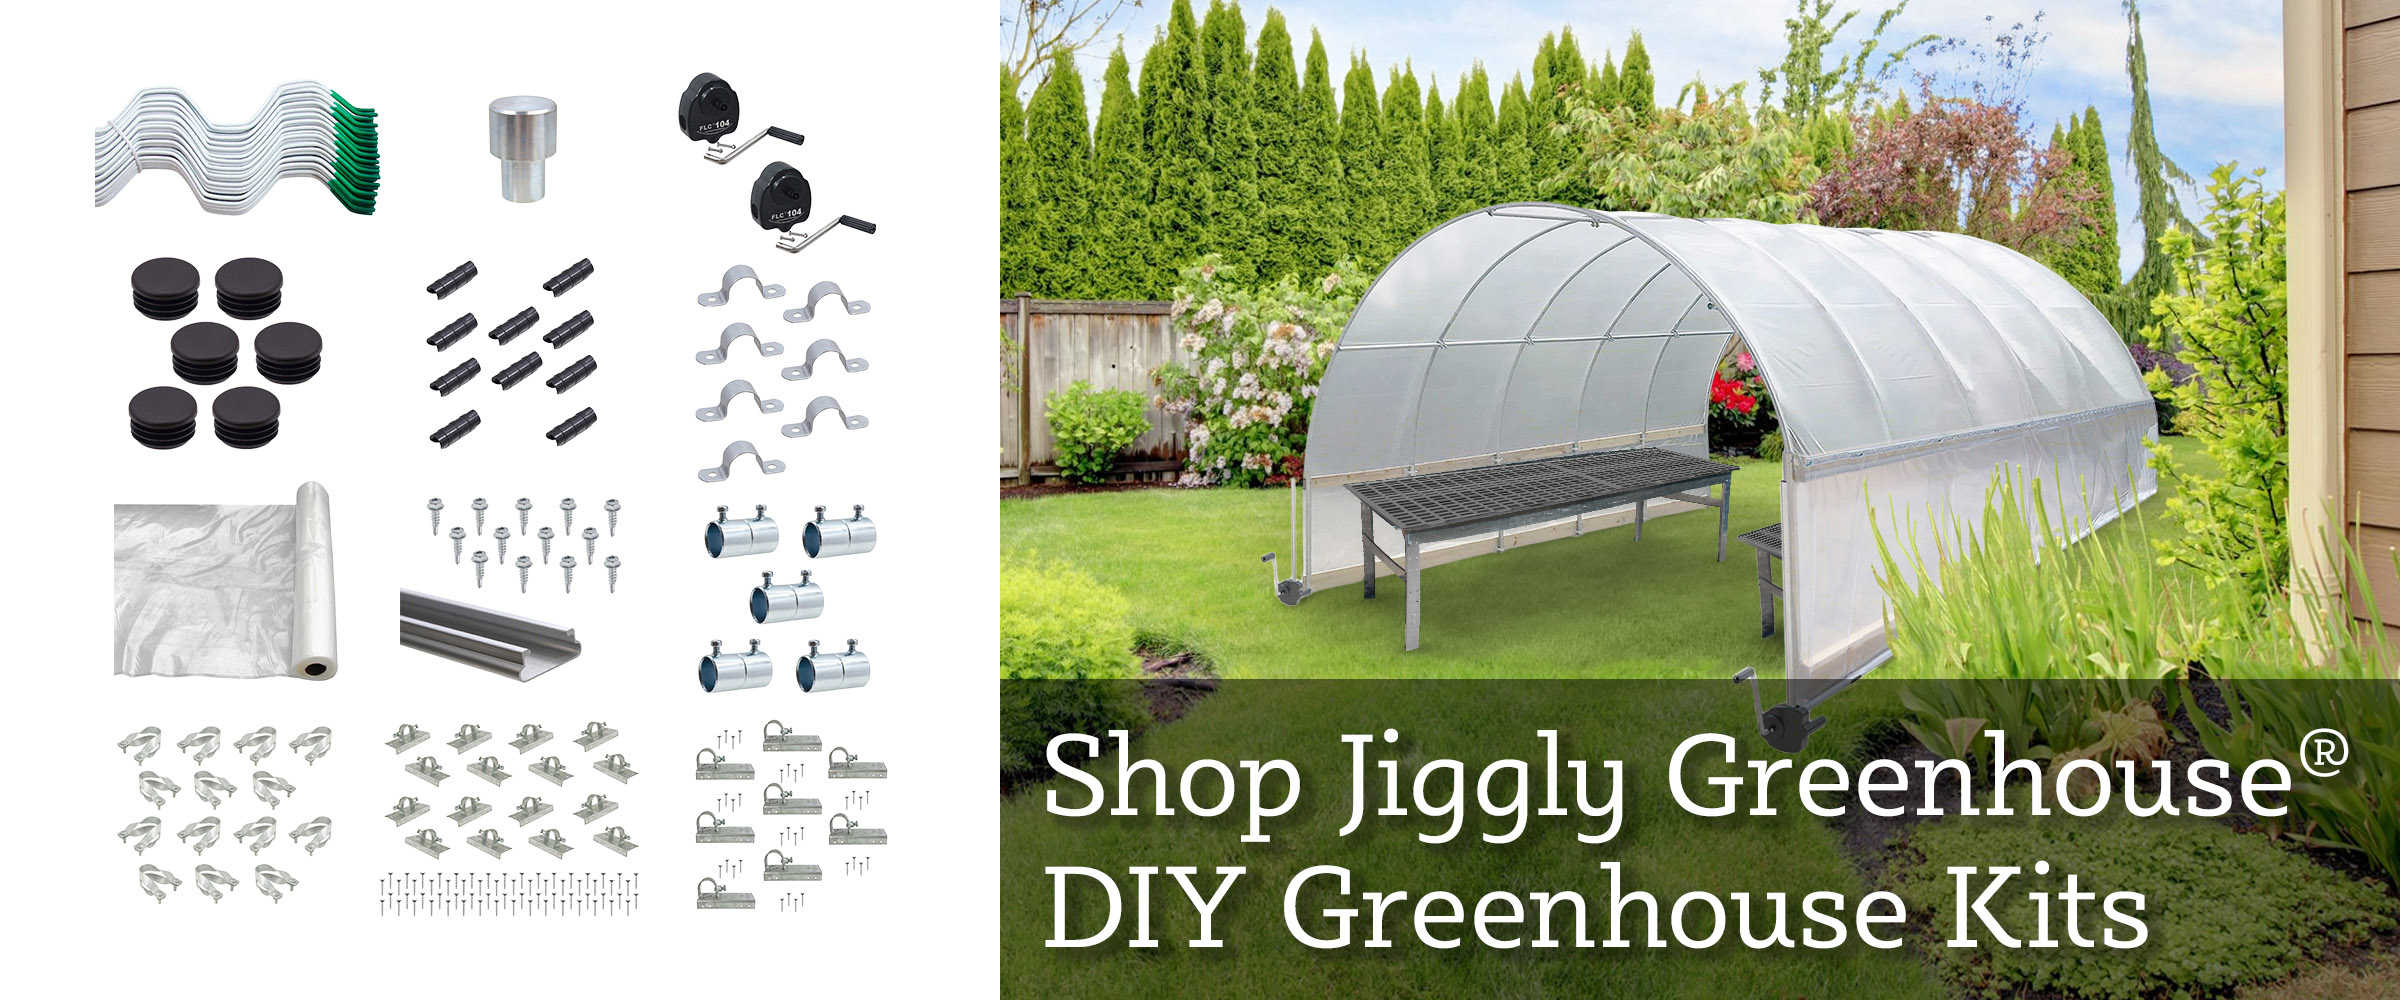 Check Out Our Jiggly Greenhouse DIY Greenhouse Kits!